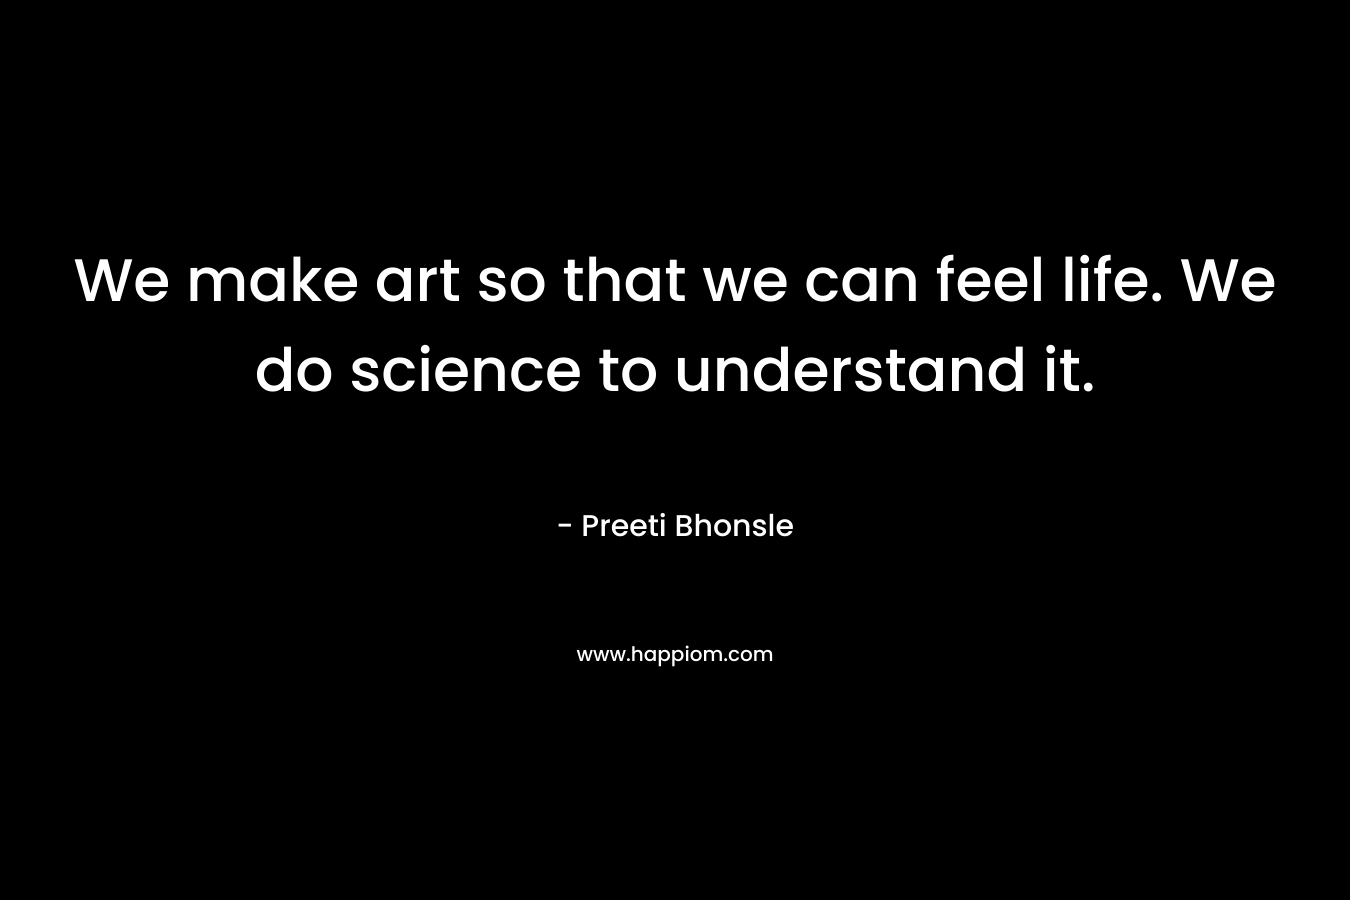 We make art so that we can feel life. We do science to understand it. – Preeti Bhonsle